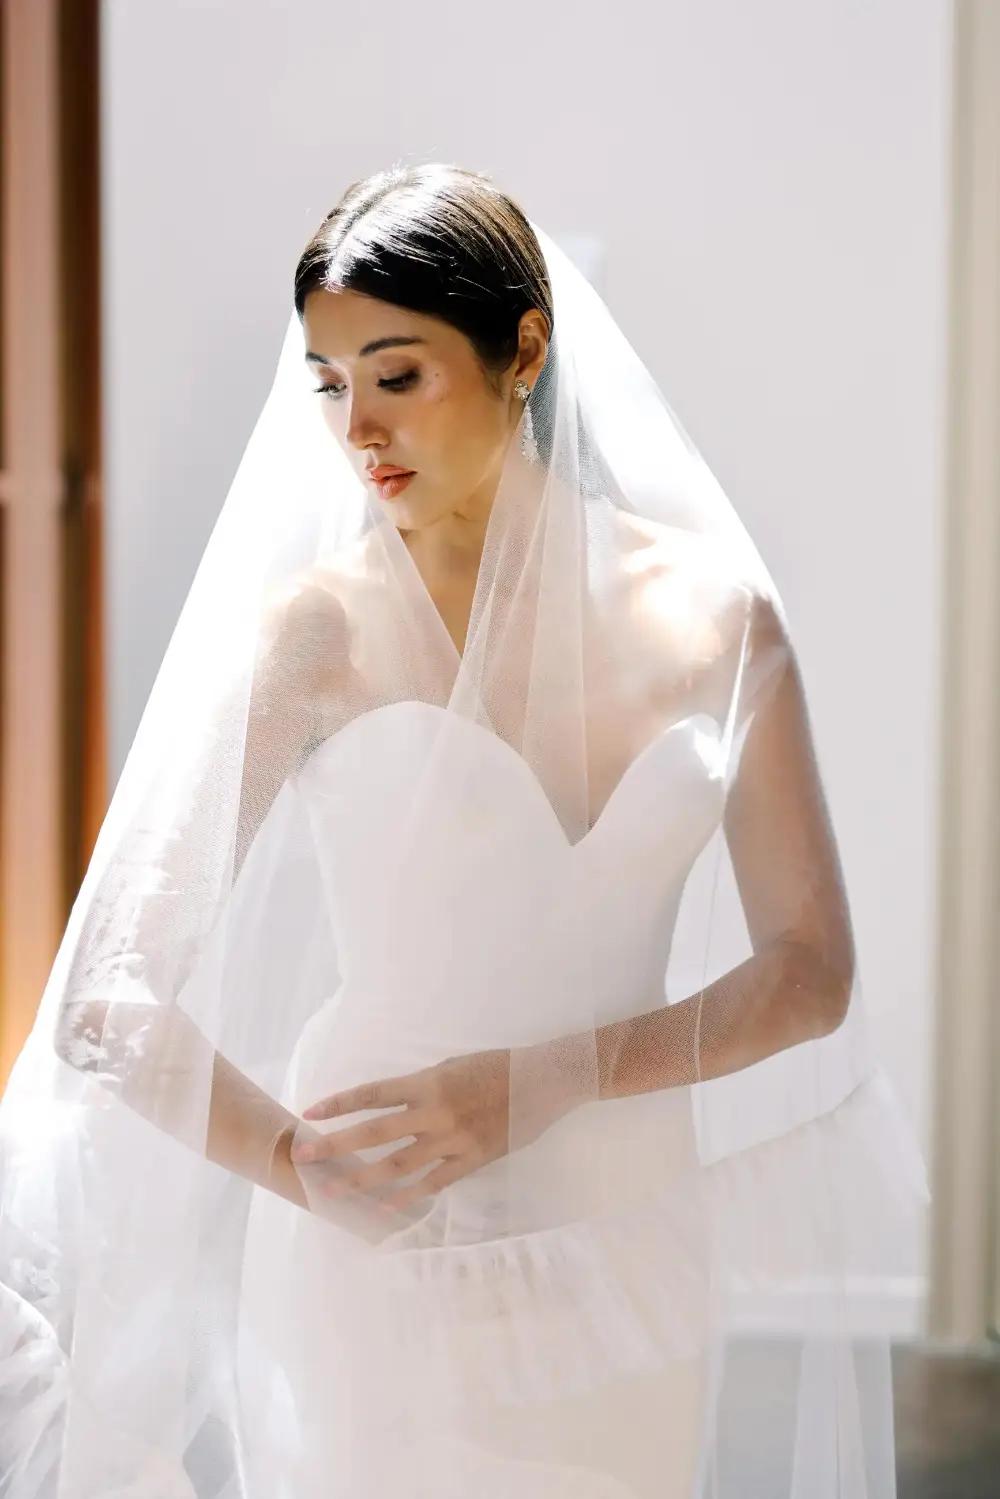 The Couture Veil